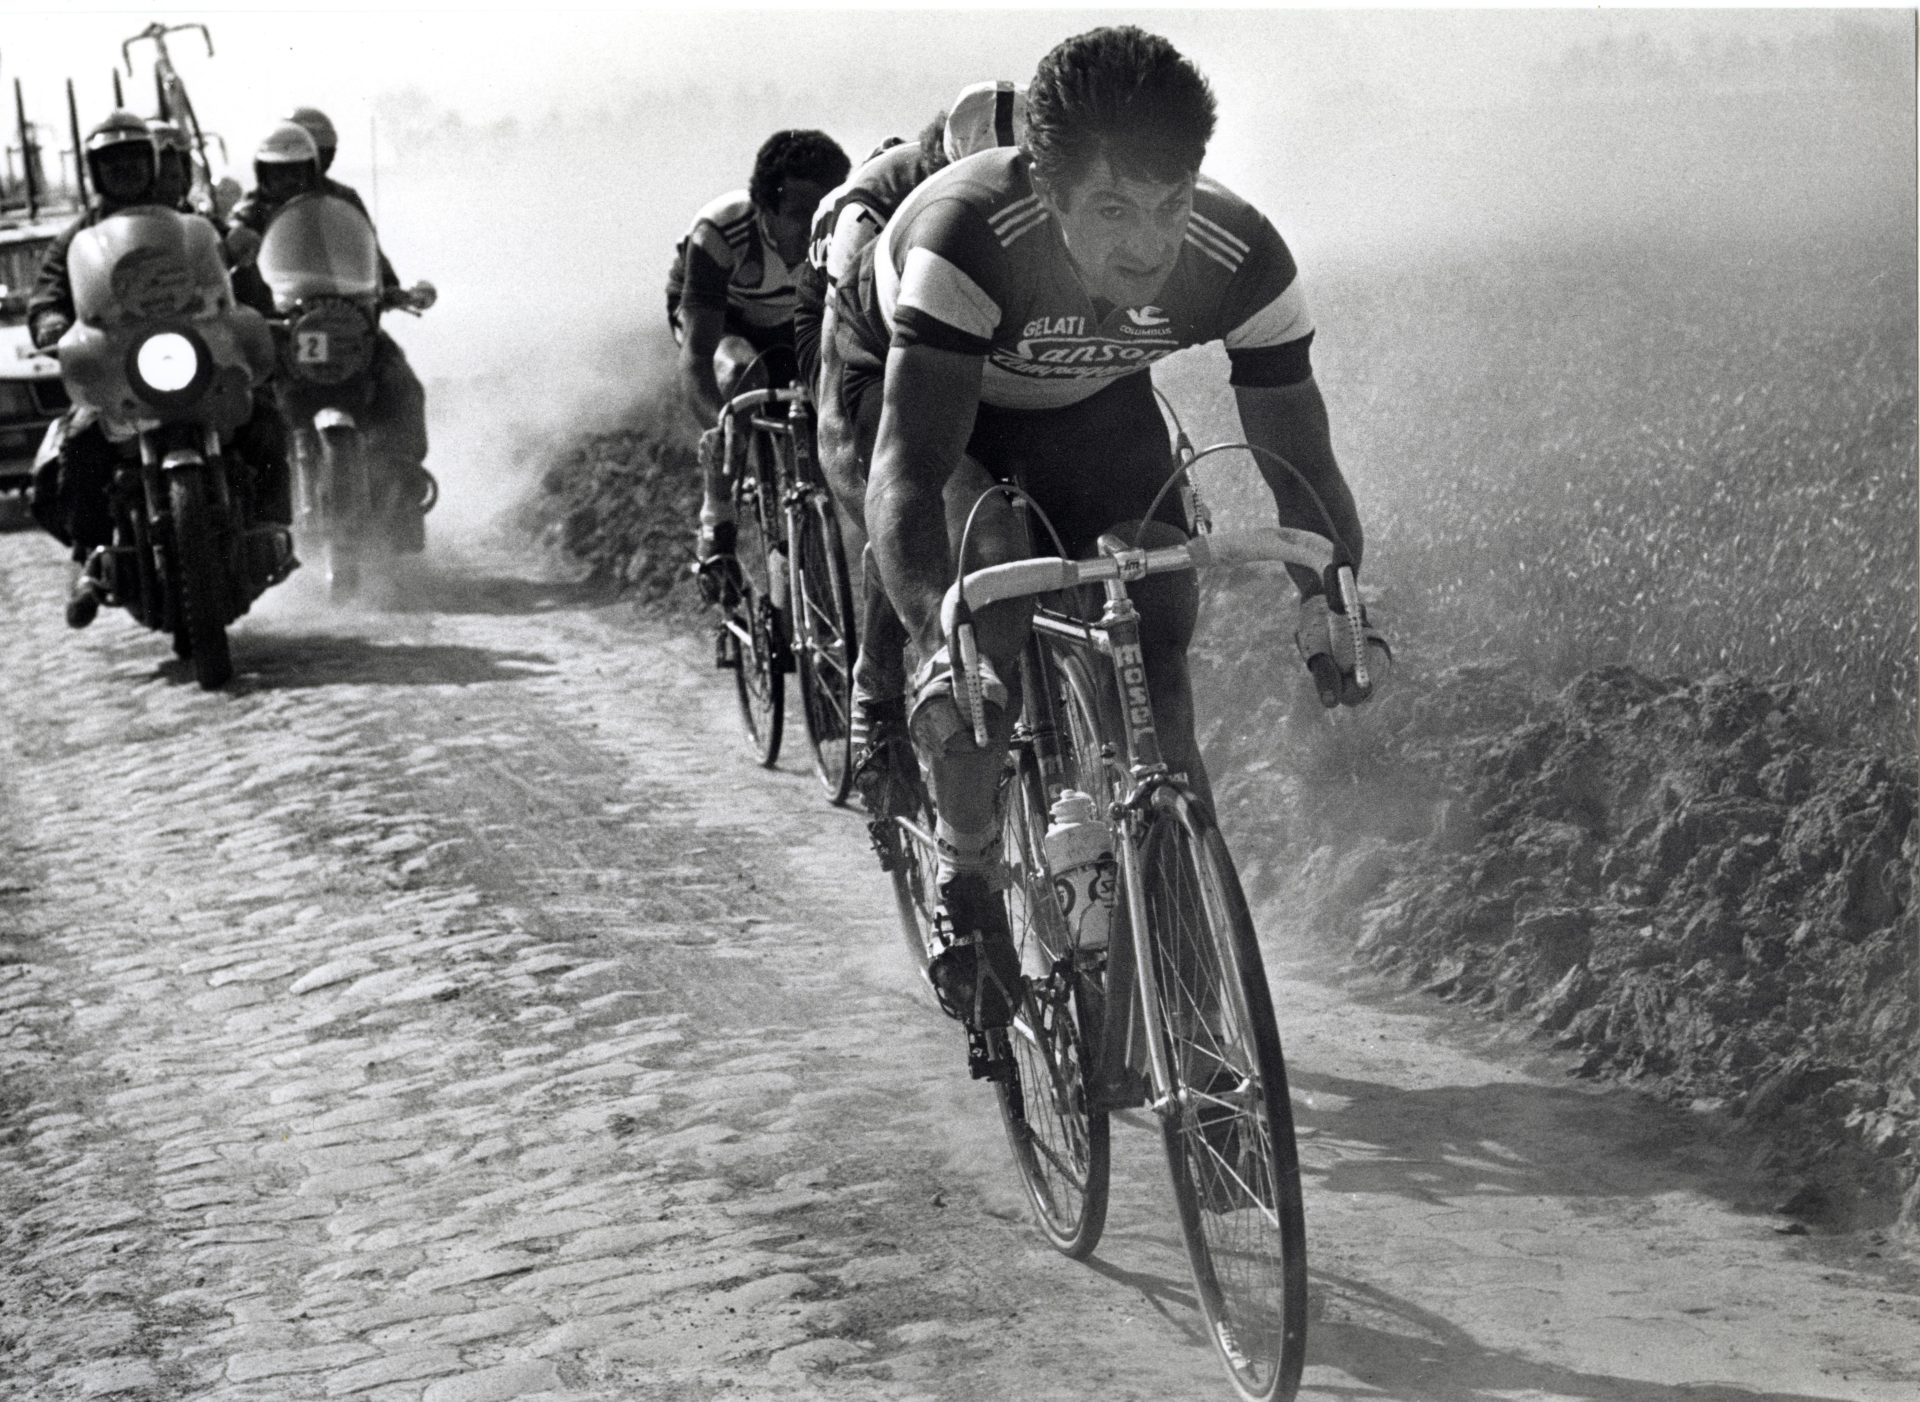 Riders race in an old edition of Paris-Roubaix, across dusty cobbles.